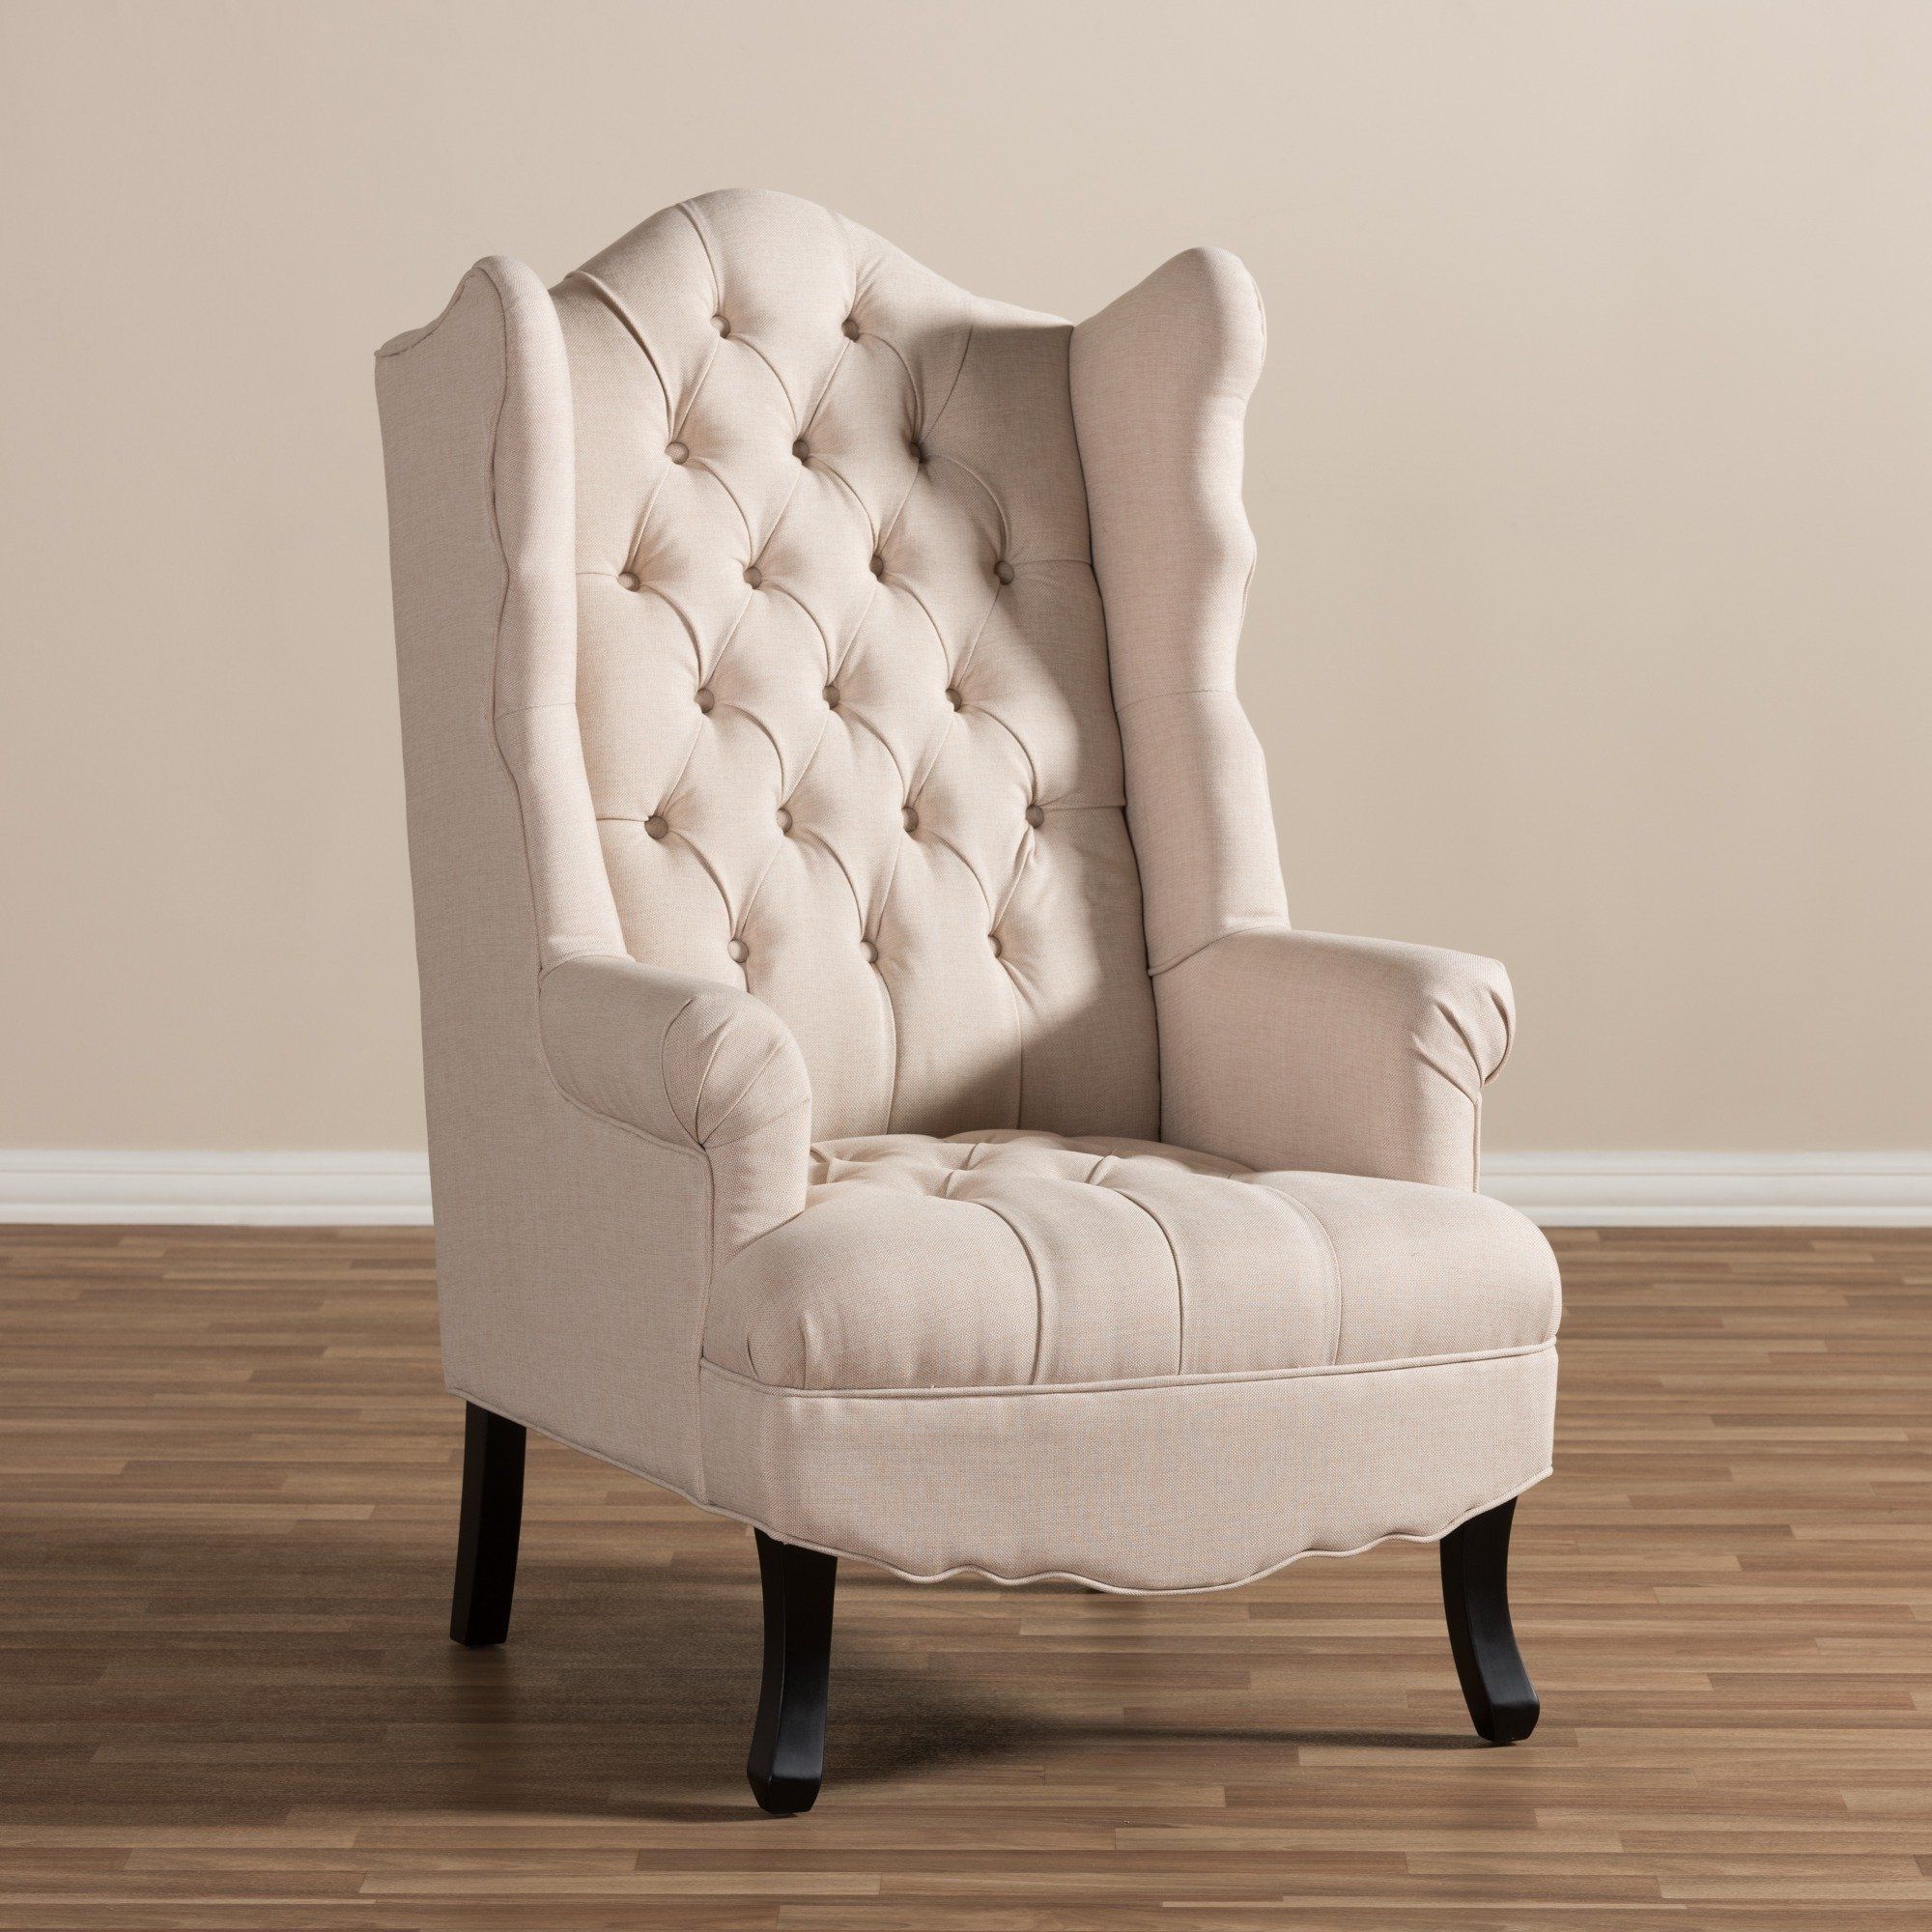 Trendy Shop Baxton Studio Norwood Beige Tufted Wingback Chair – Free Within Norwood Upholstered Side Chairs (View 10 of 20)